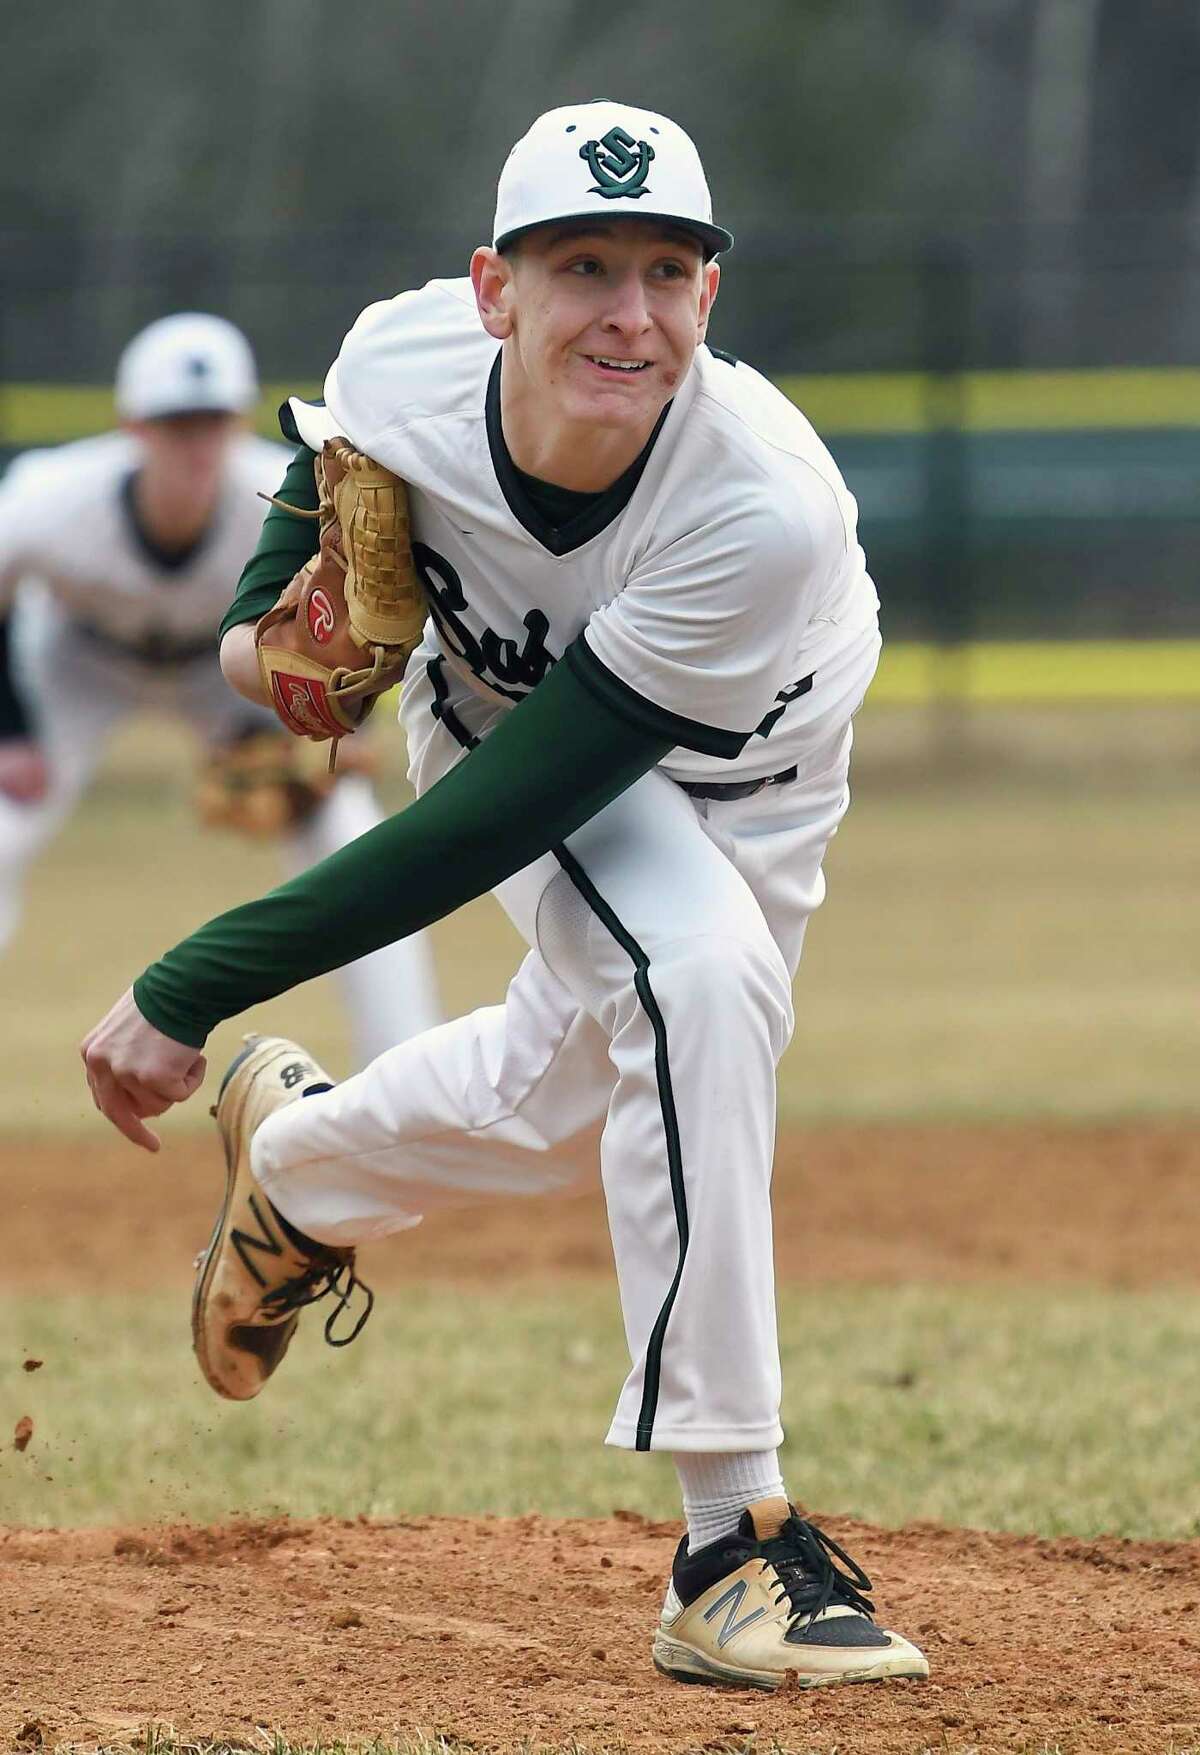 Schalmont's Christian Caputo (20) pitches against Voorheesville during a Section II high school baseball game Wednesday, April 11, 2017, in Rotterdam, N.Y. (Hans Pennink / Special to the Times Union)